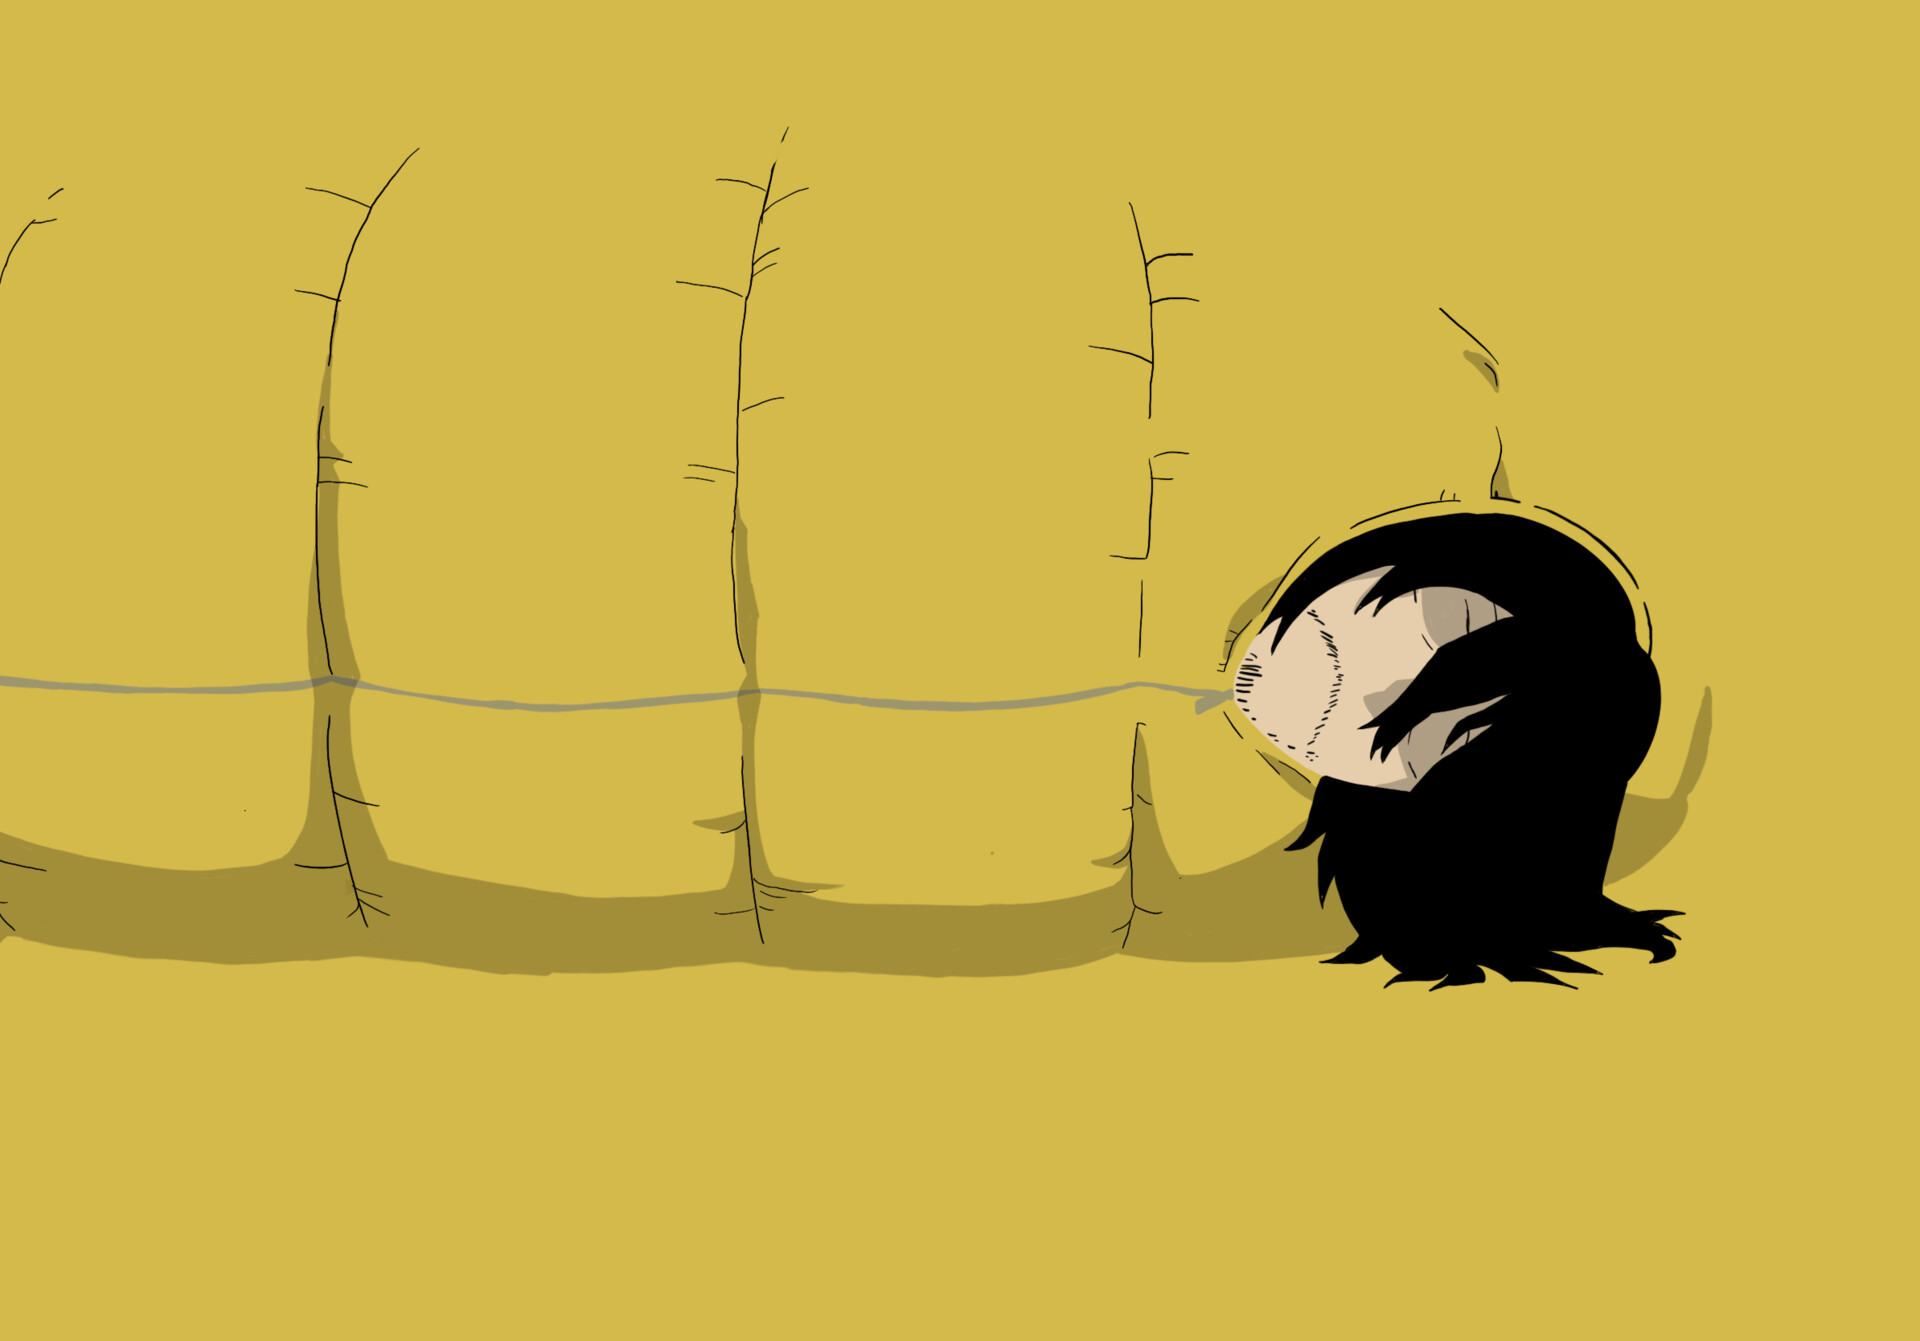 Pictures Of Mr Aizawa Wallpapers